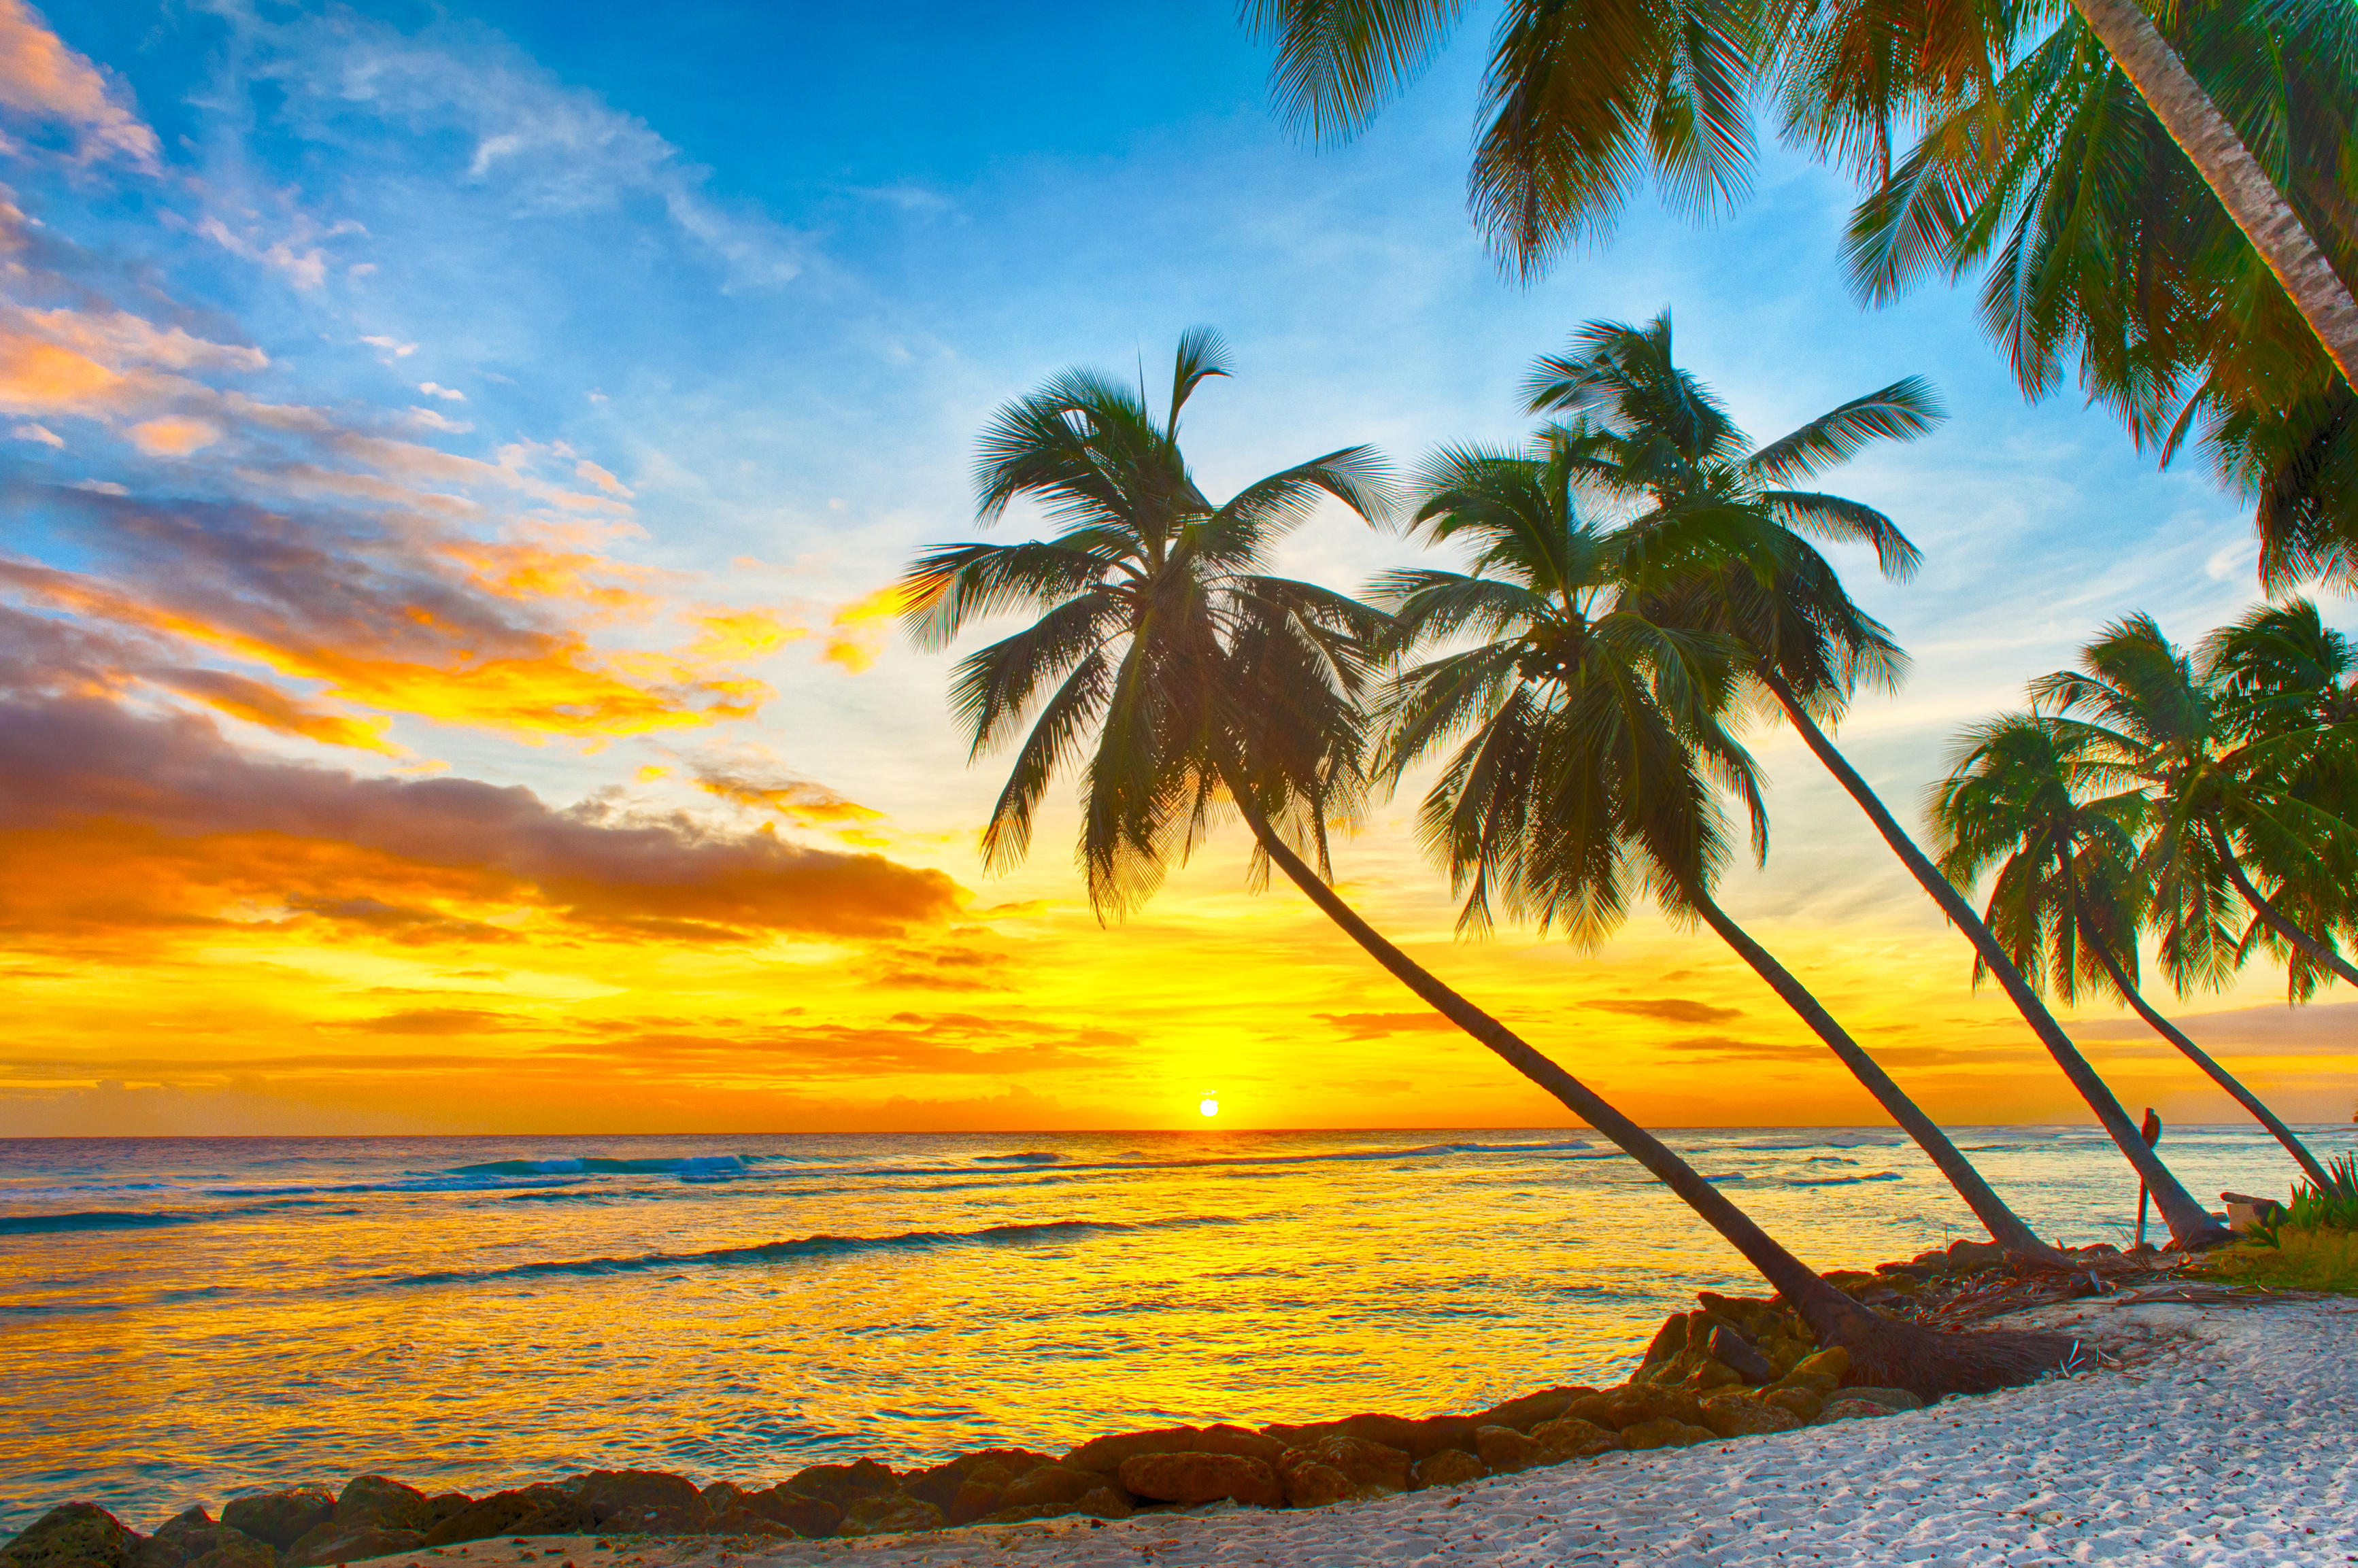 Flights to Barbados in the $200s & low $300s round-trip!